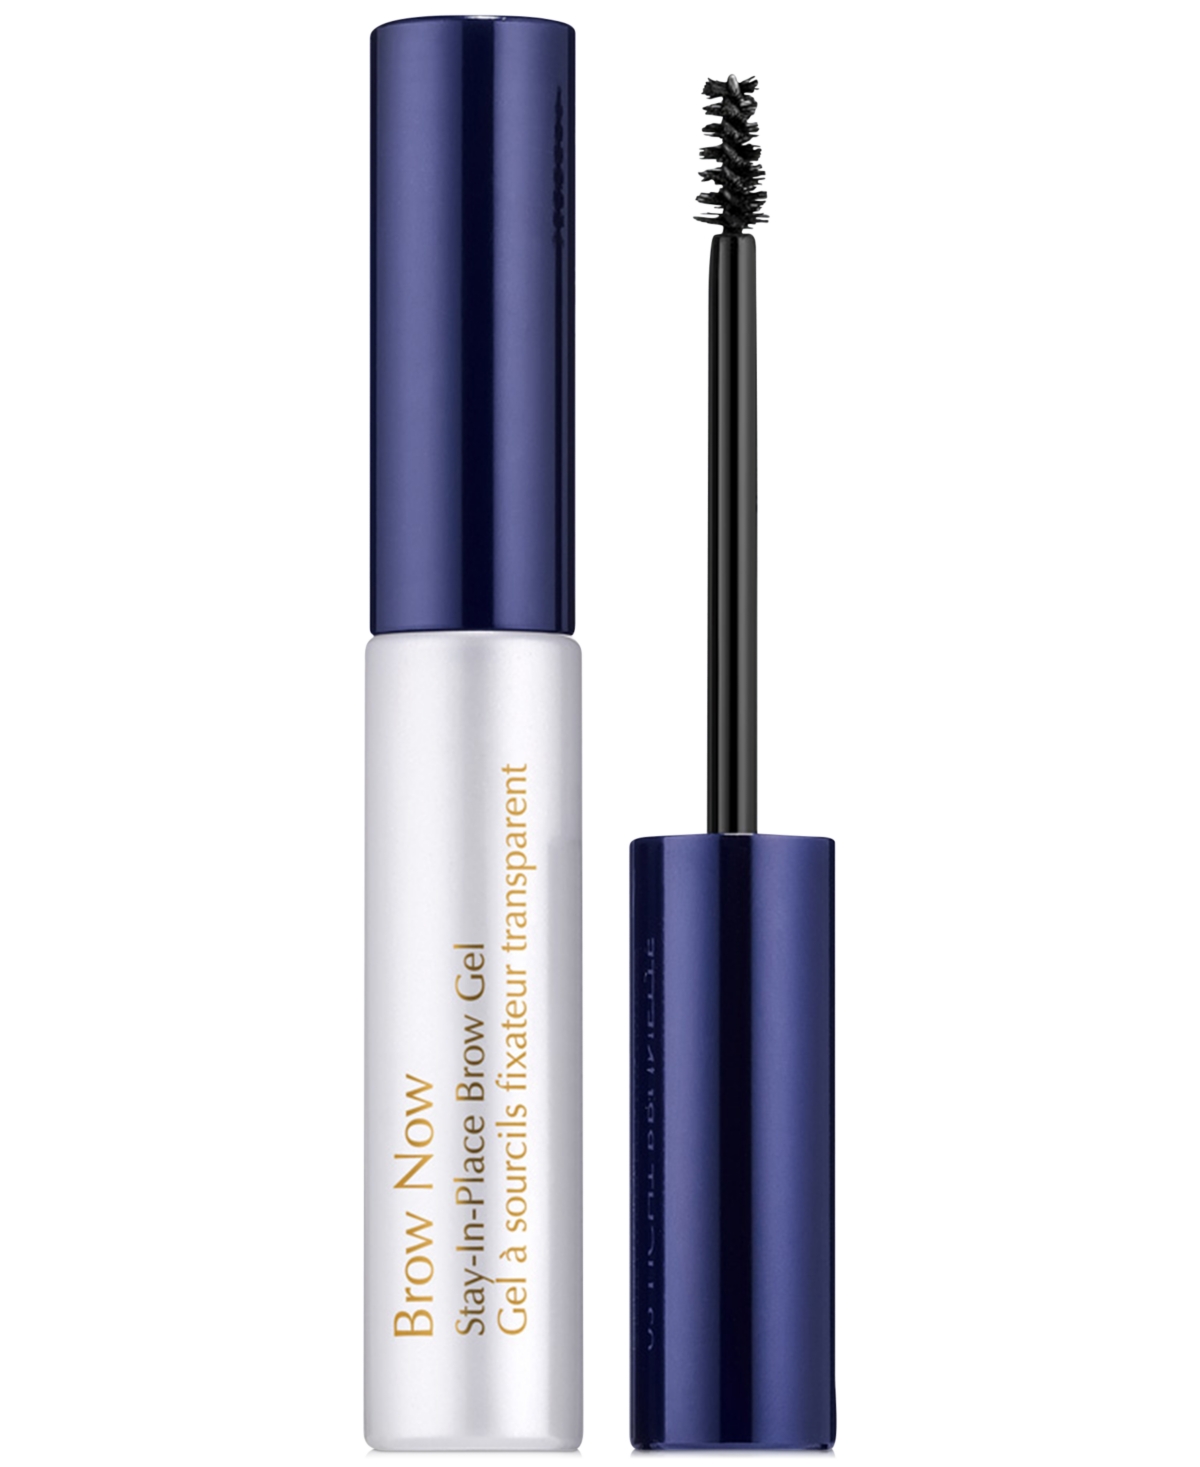 Estée Lauder Brow Now Stay-in-place Brow Gel In Clear